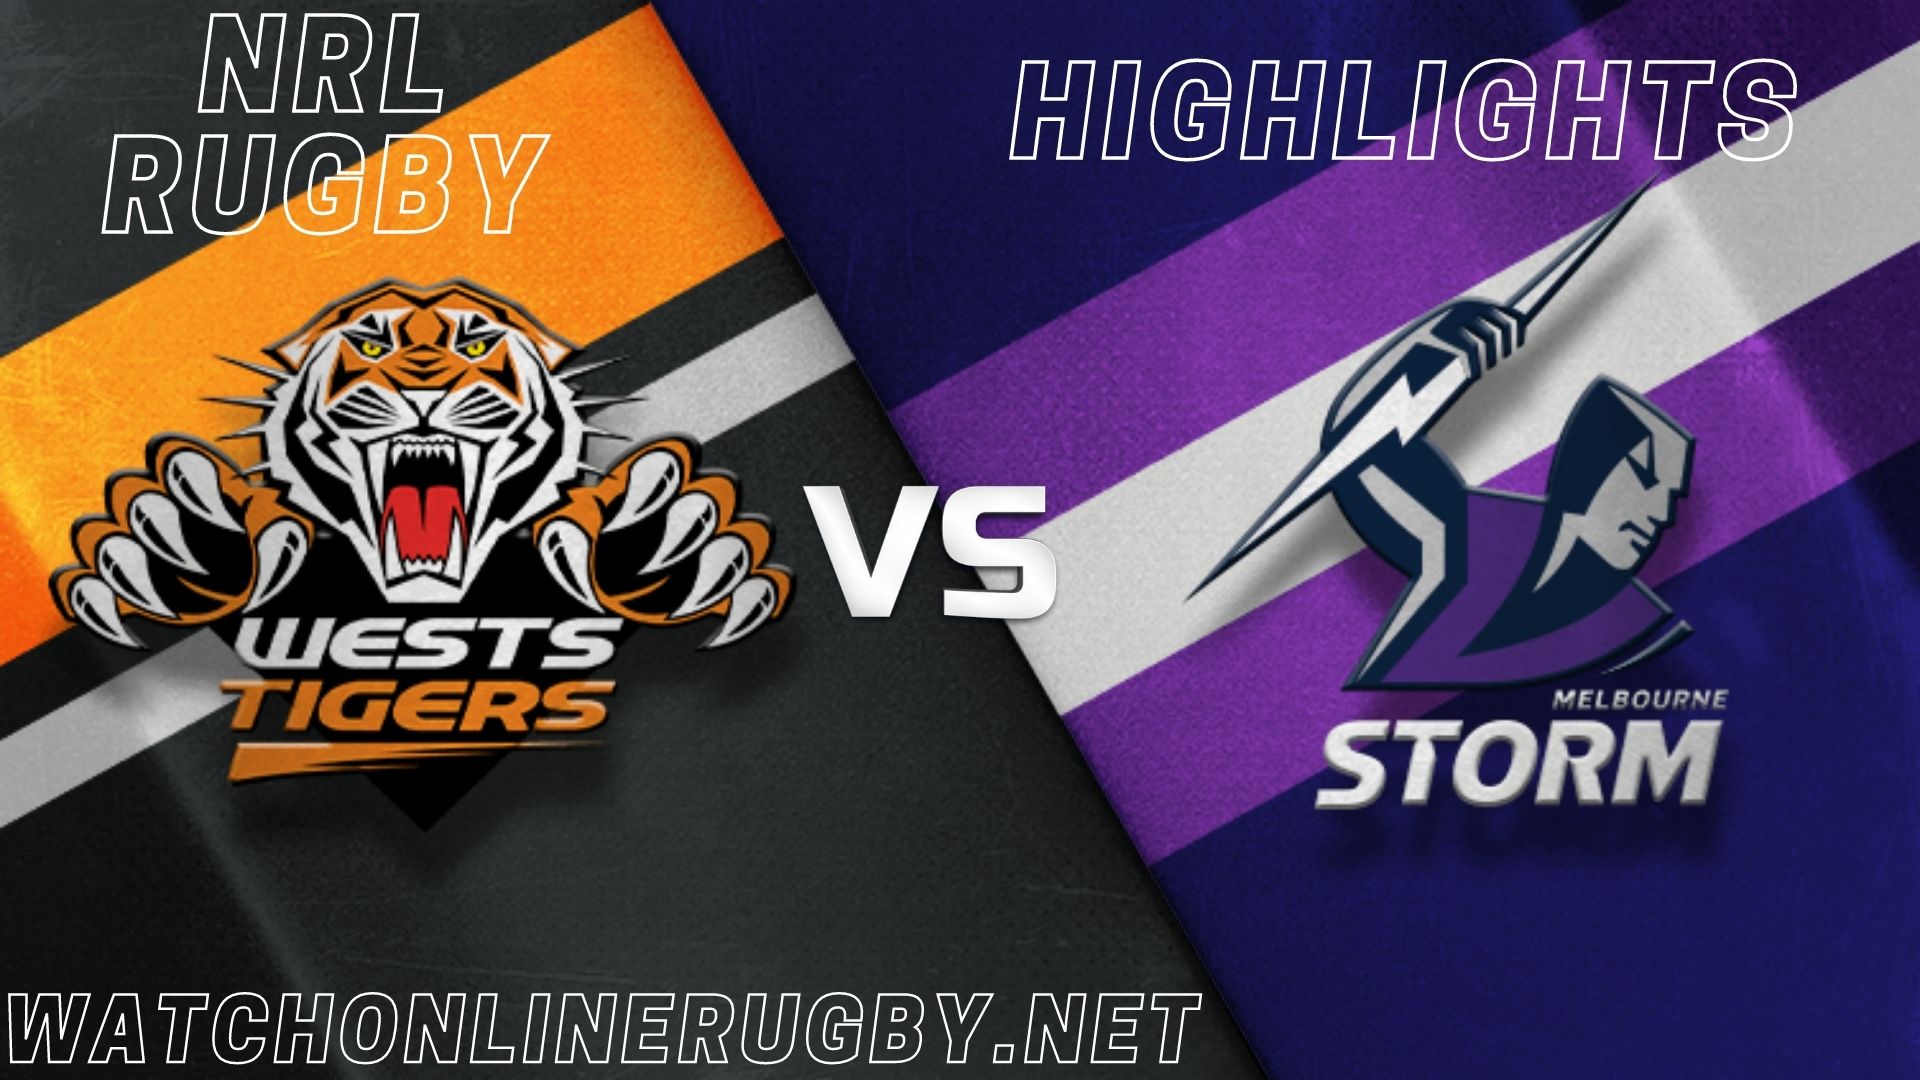 Wests Tigers Vs Storm Highlights RD 1 NRL Rugby